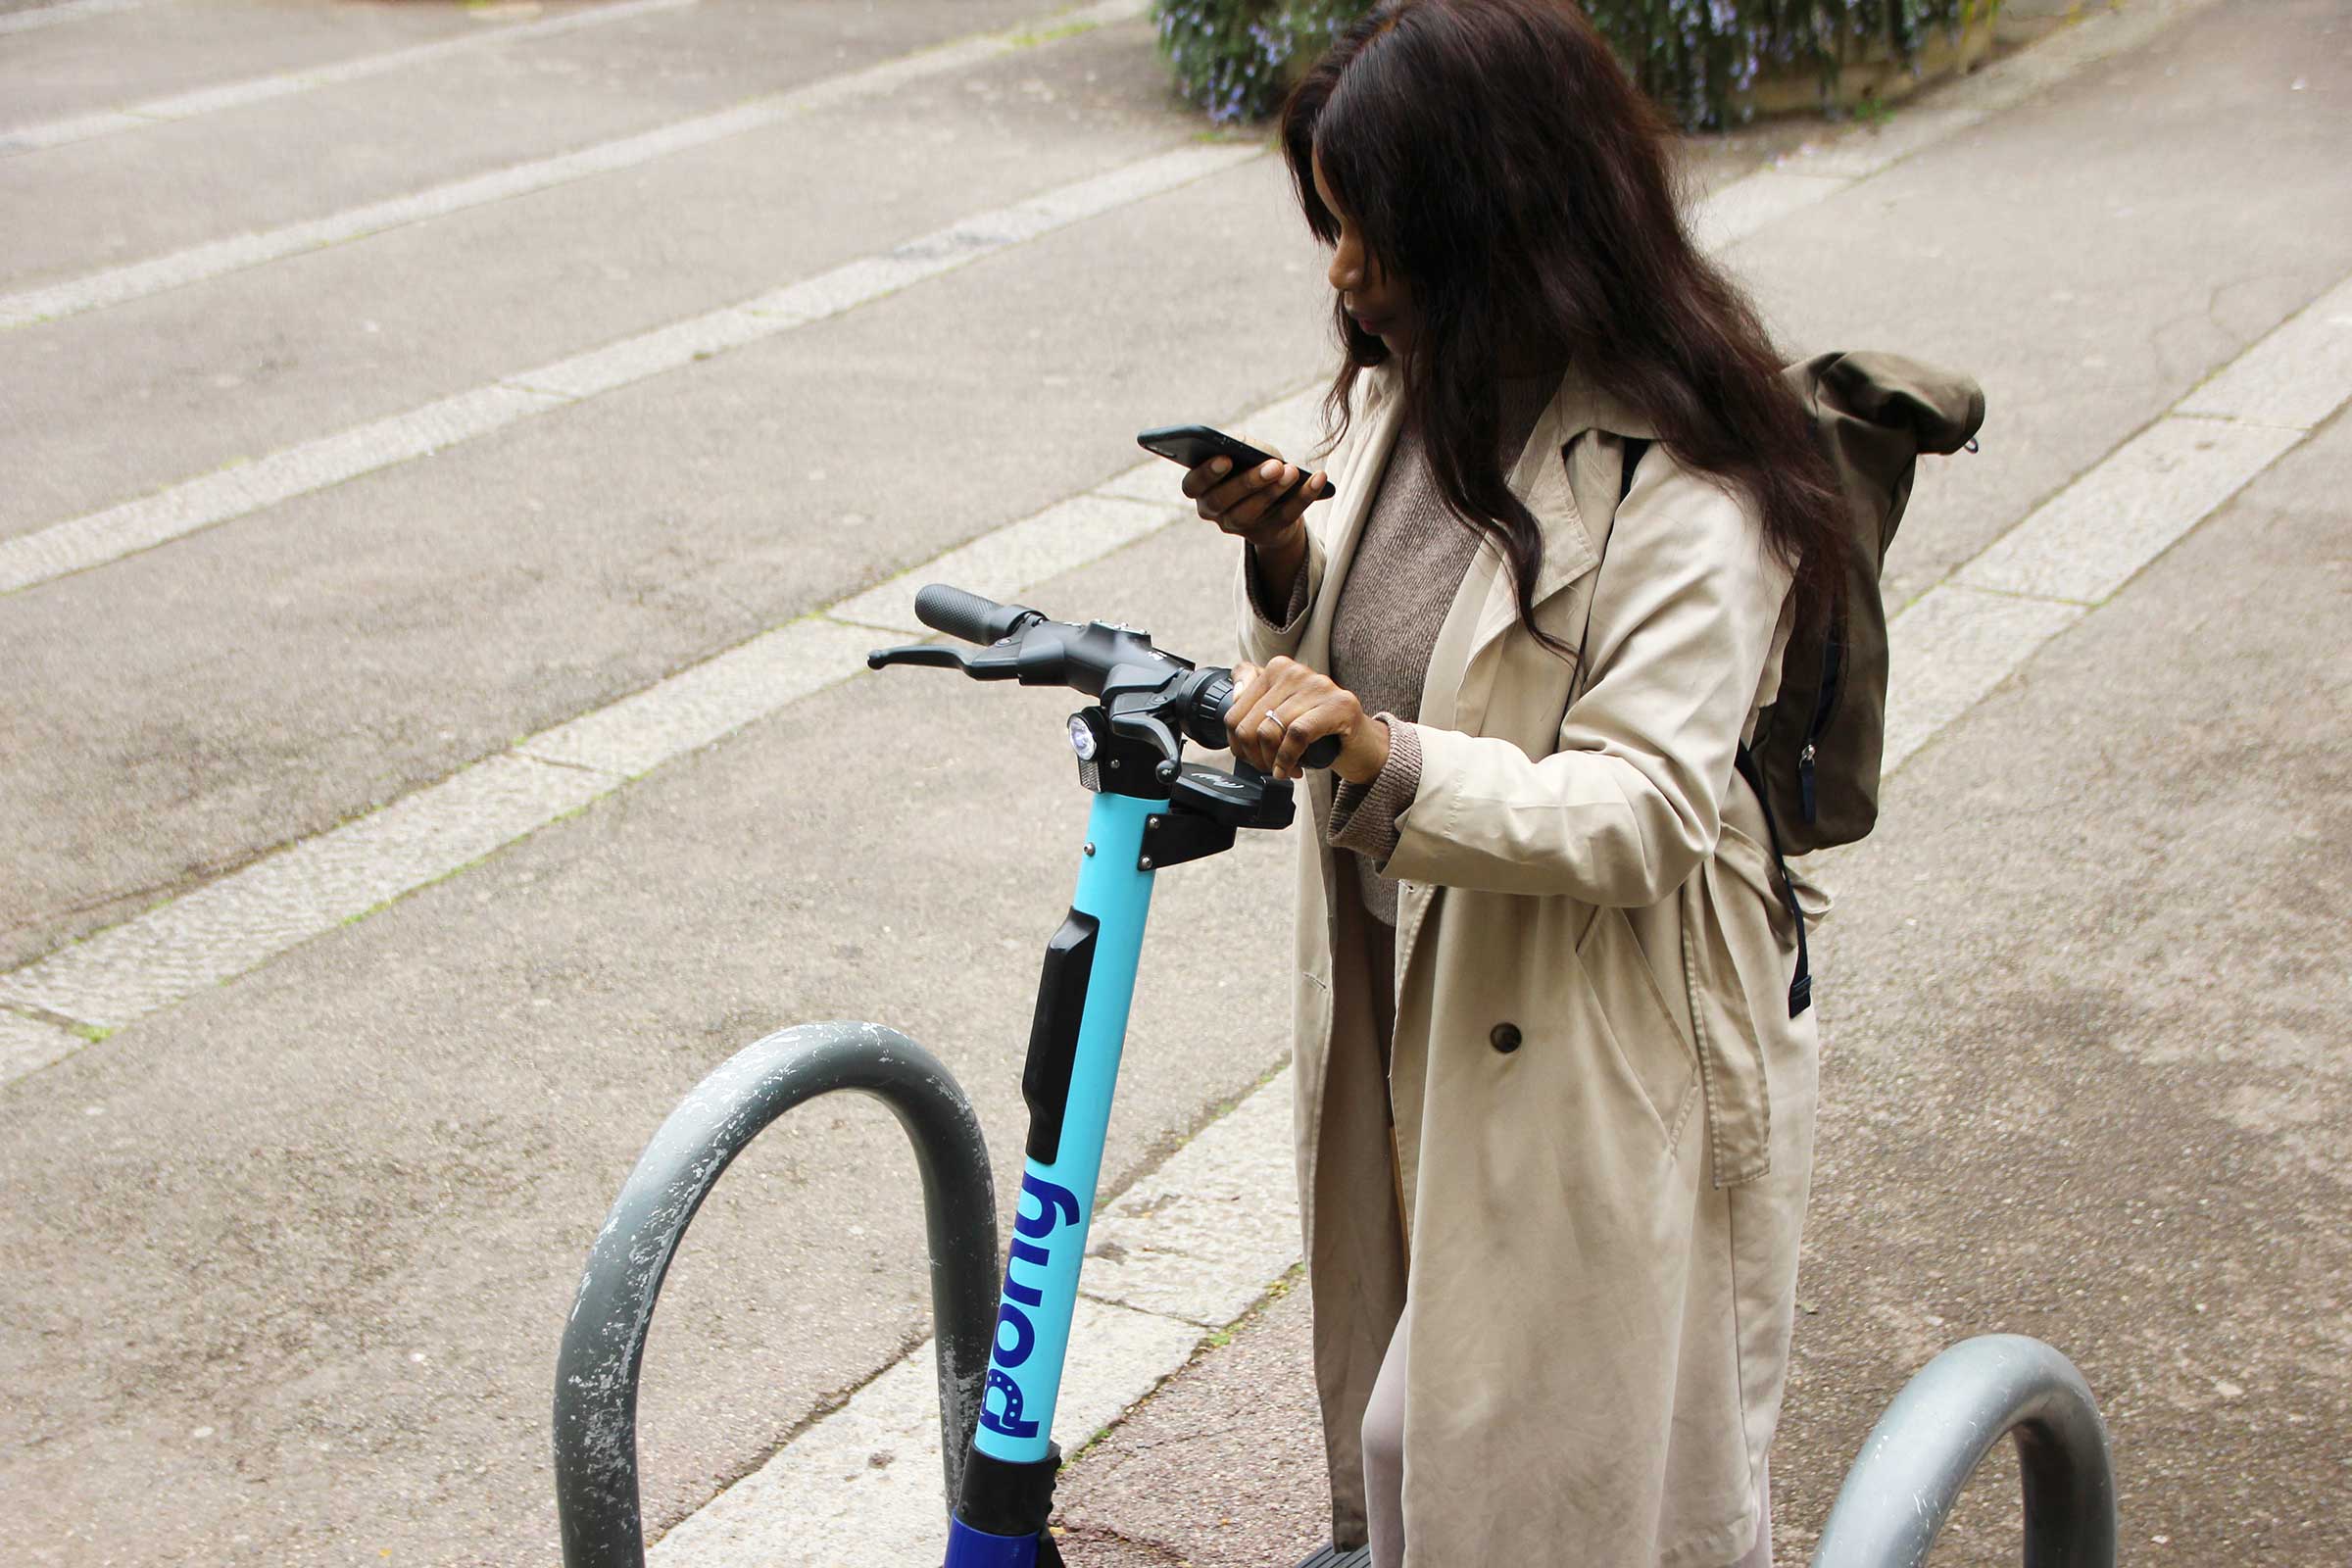 Woman rents electric scooter via an app from her smartphone